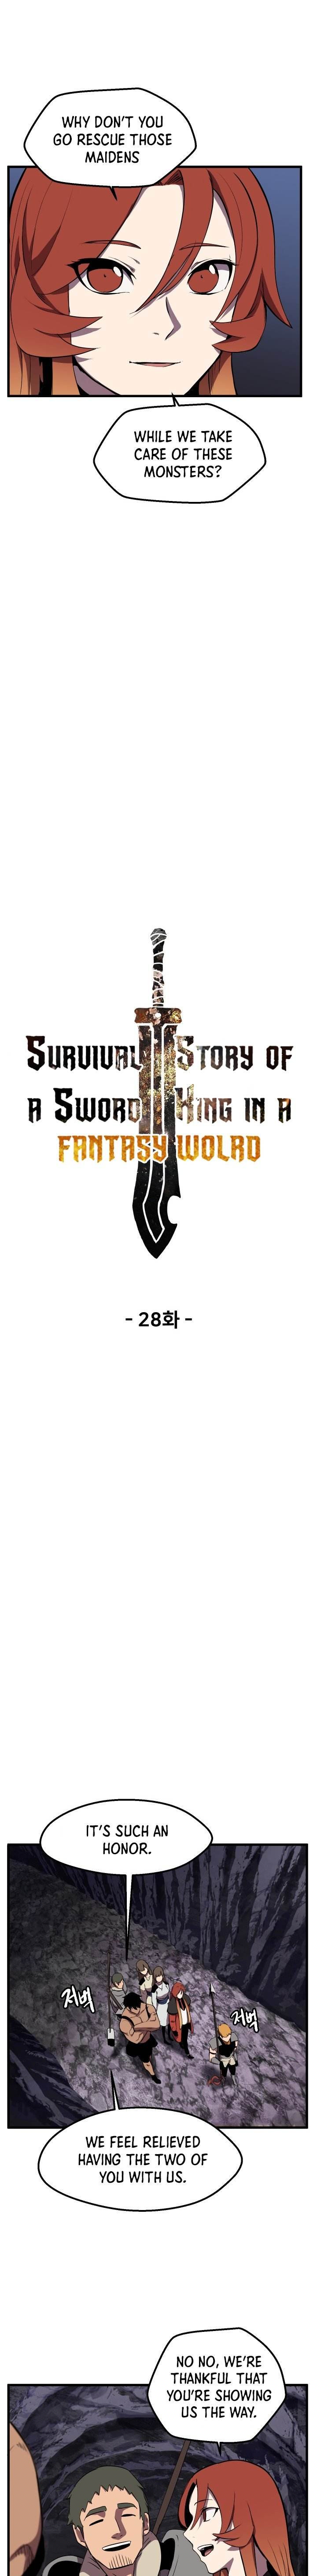 survival-story-of-a-sword-king-in-a-fantasy-world-chap-28-7